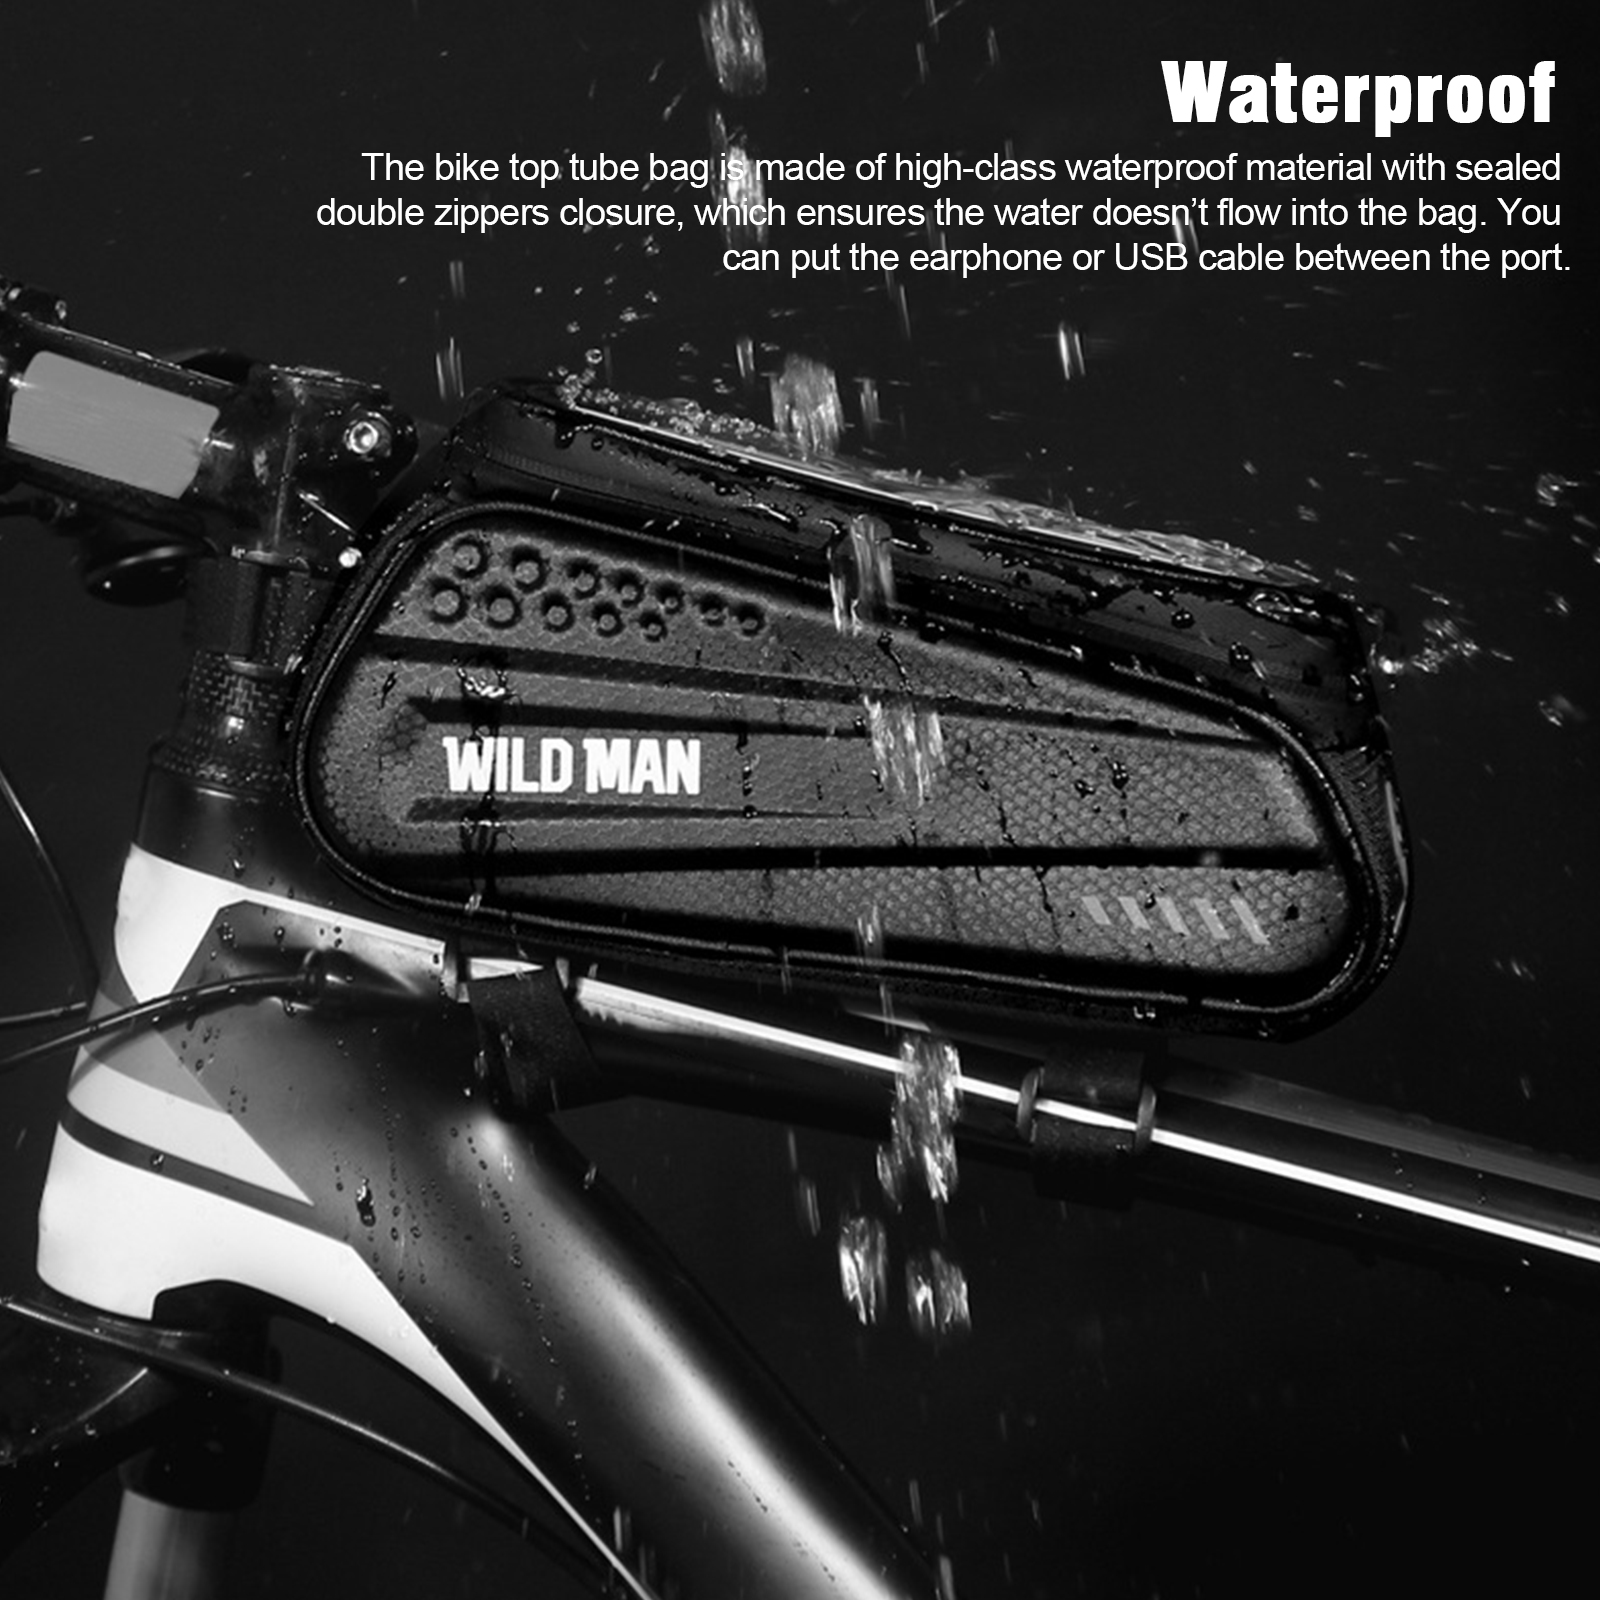 WILD MAN Mountain Bike Bicycle Front Tube Water Proof MTB Phone Holder Case Bags